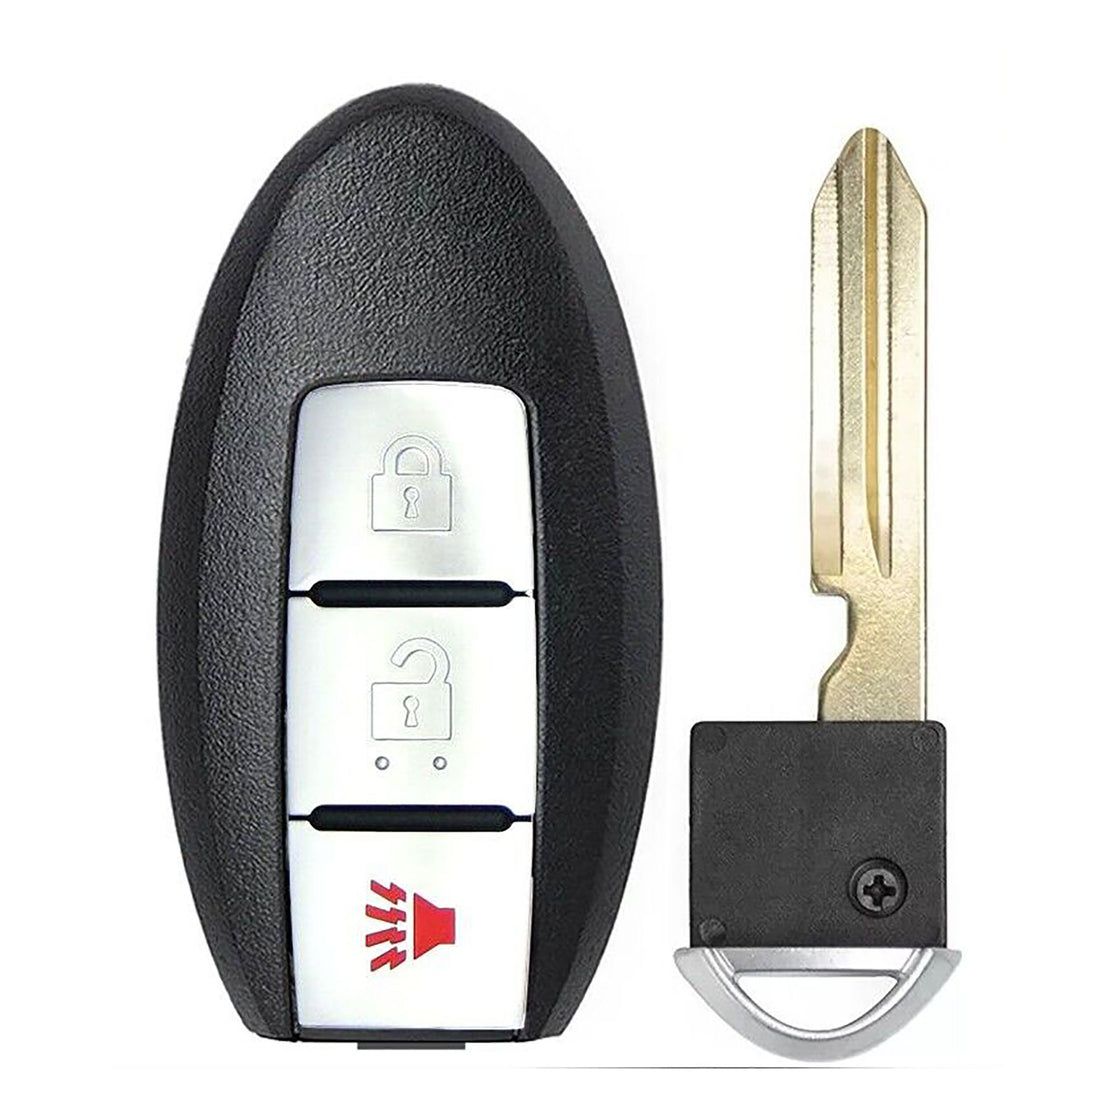 1x New Replacement Proximity Key Fob Compatible with & Fit For Nissan Vehicles Read Description - MPN S180144304-02